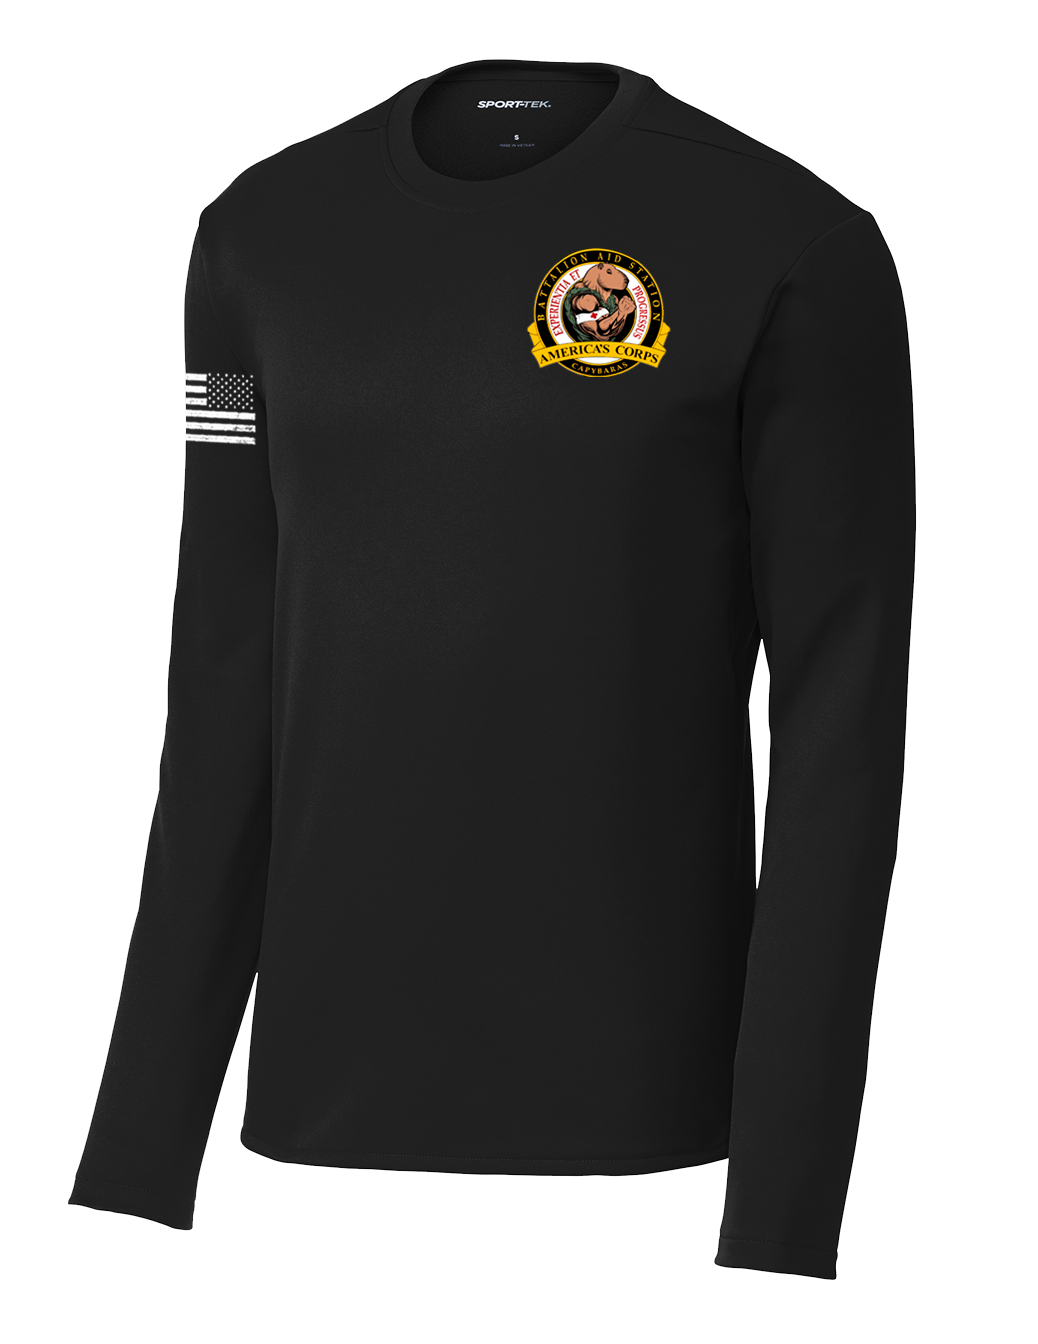 Battalion Aid Station HHBN I Corps Fleece Pullover Crew with Flag on R ...